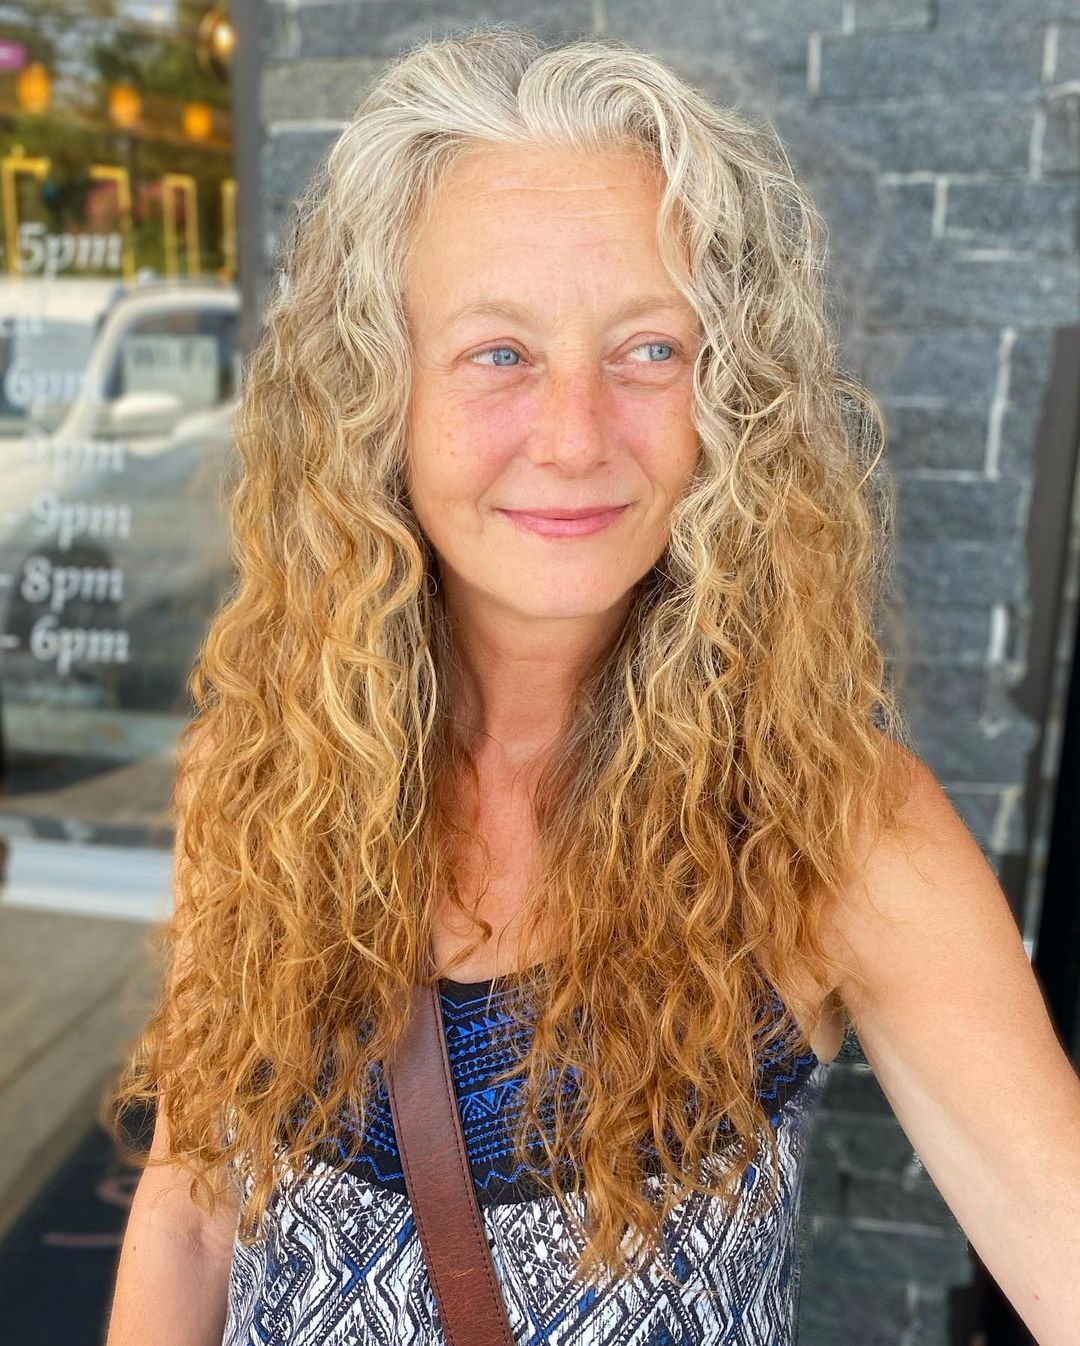 Woman over 60 with Long Curly Hair Growing Our Gray